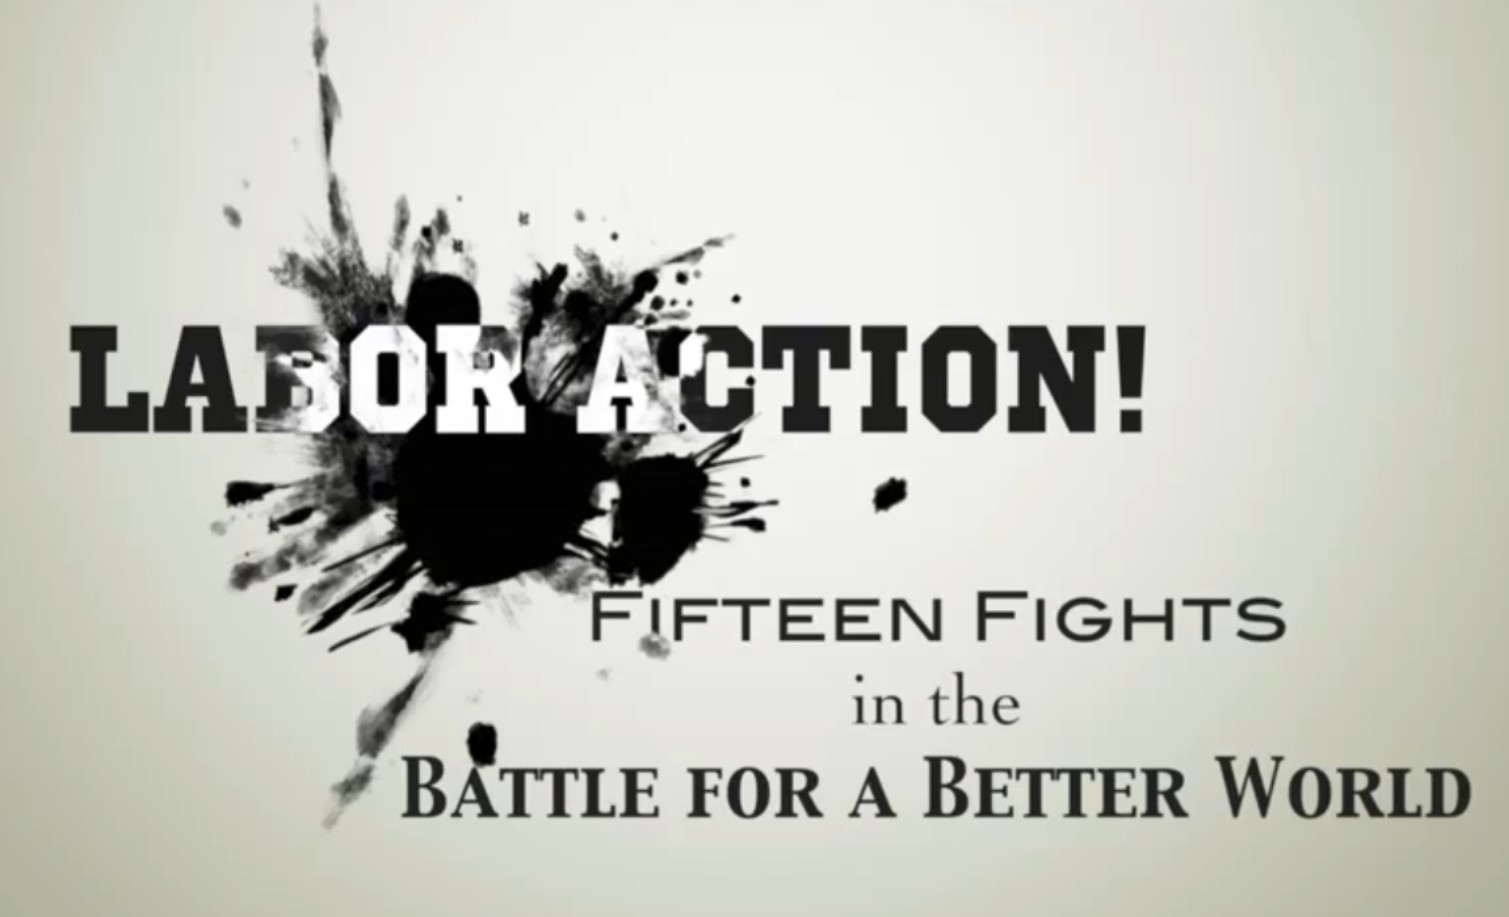 Labor Action! Fifteen Fights in the Battle for a Better World